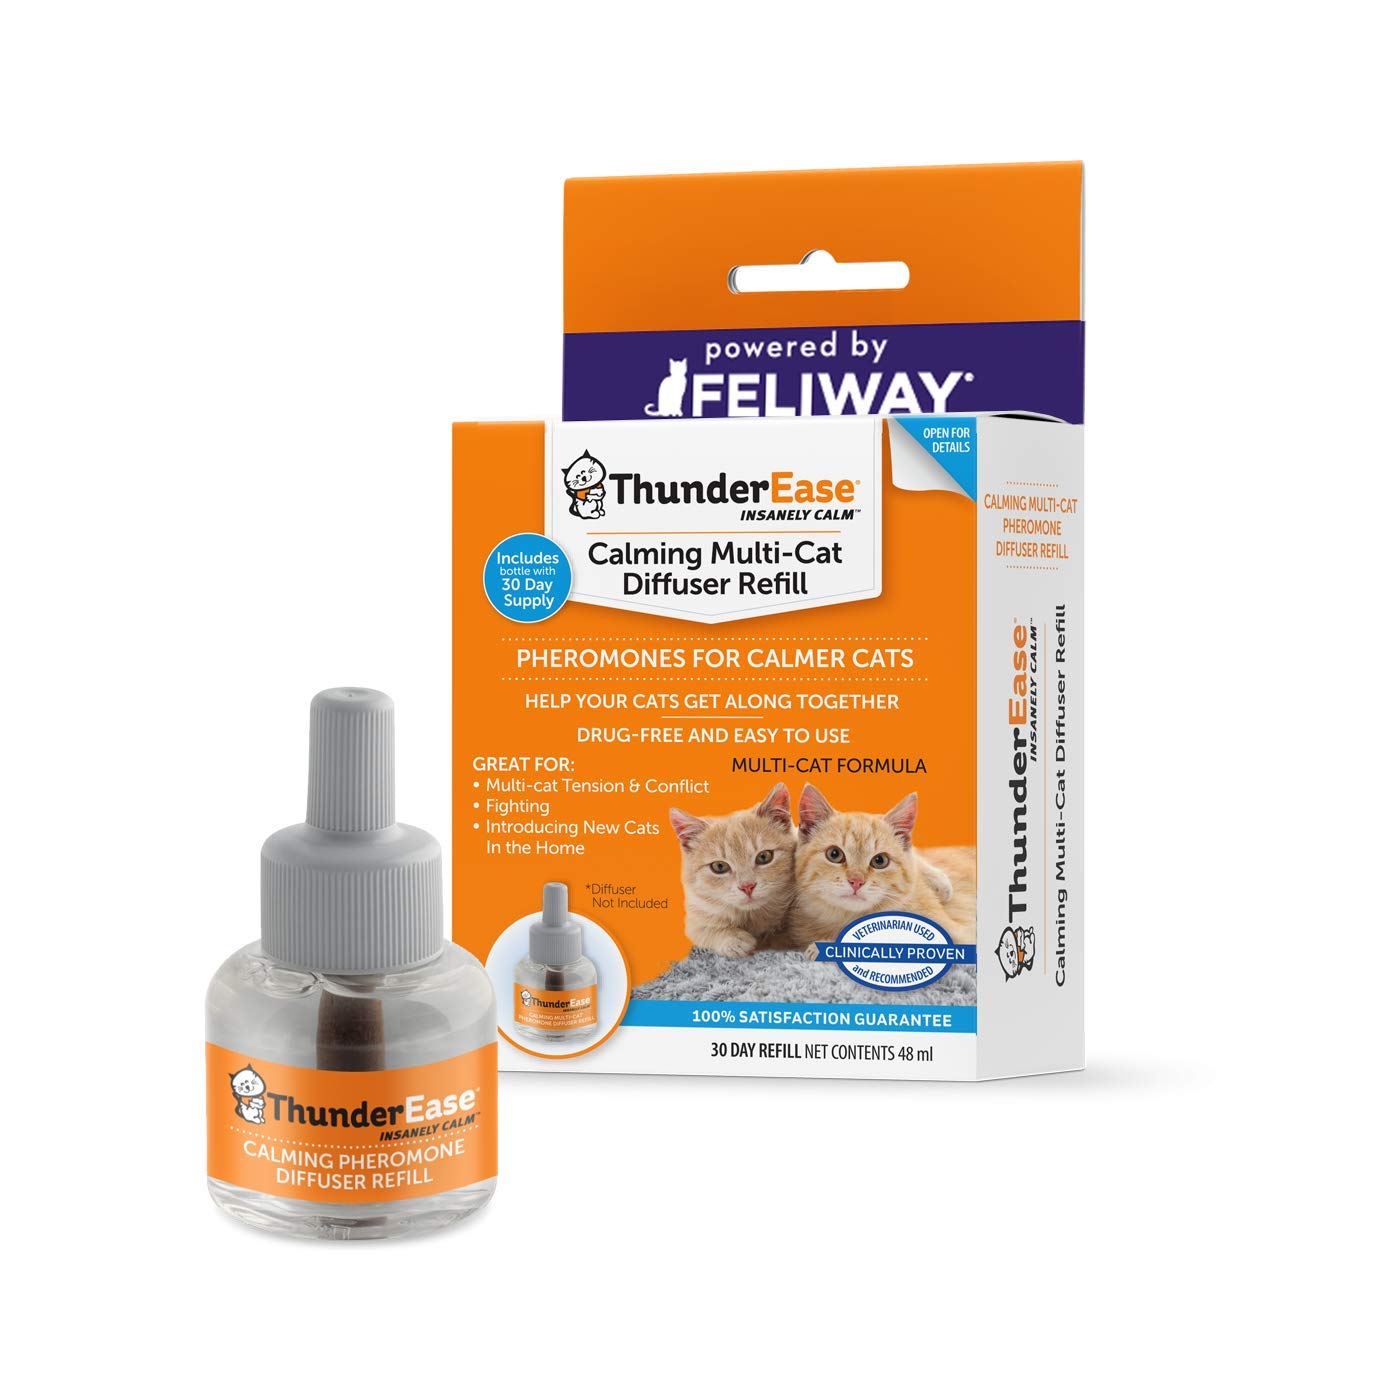 Thunderease Multicat Calming Pheromone Diffuser Refill Powered By Feliway Reduce Cat Conflict, Tension And Fighting (30 Day Supp